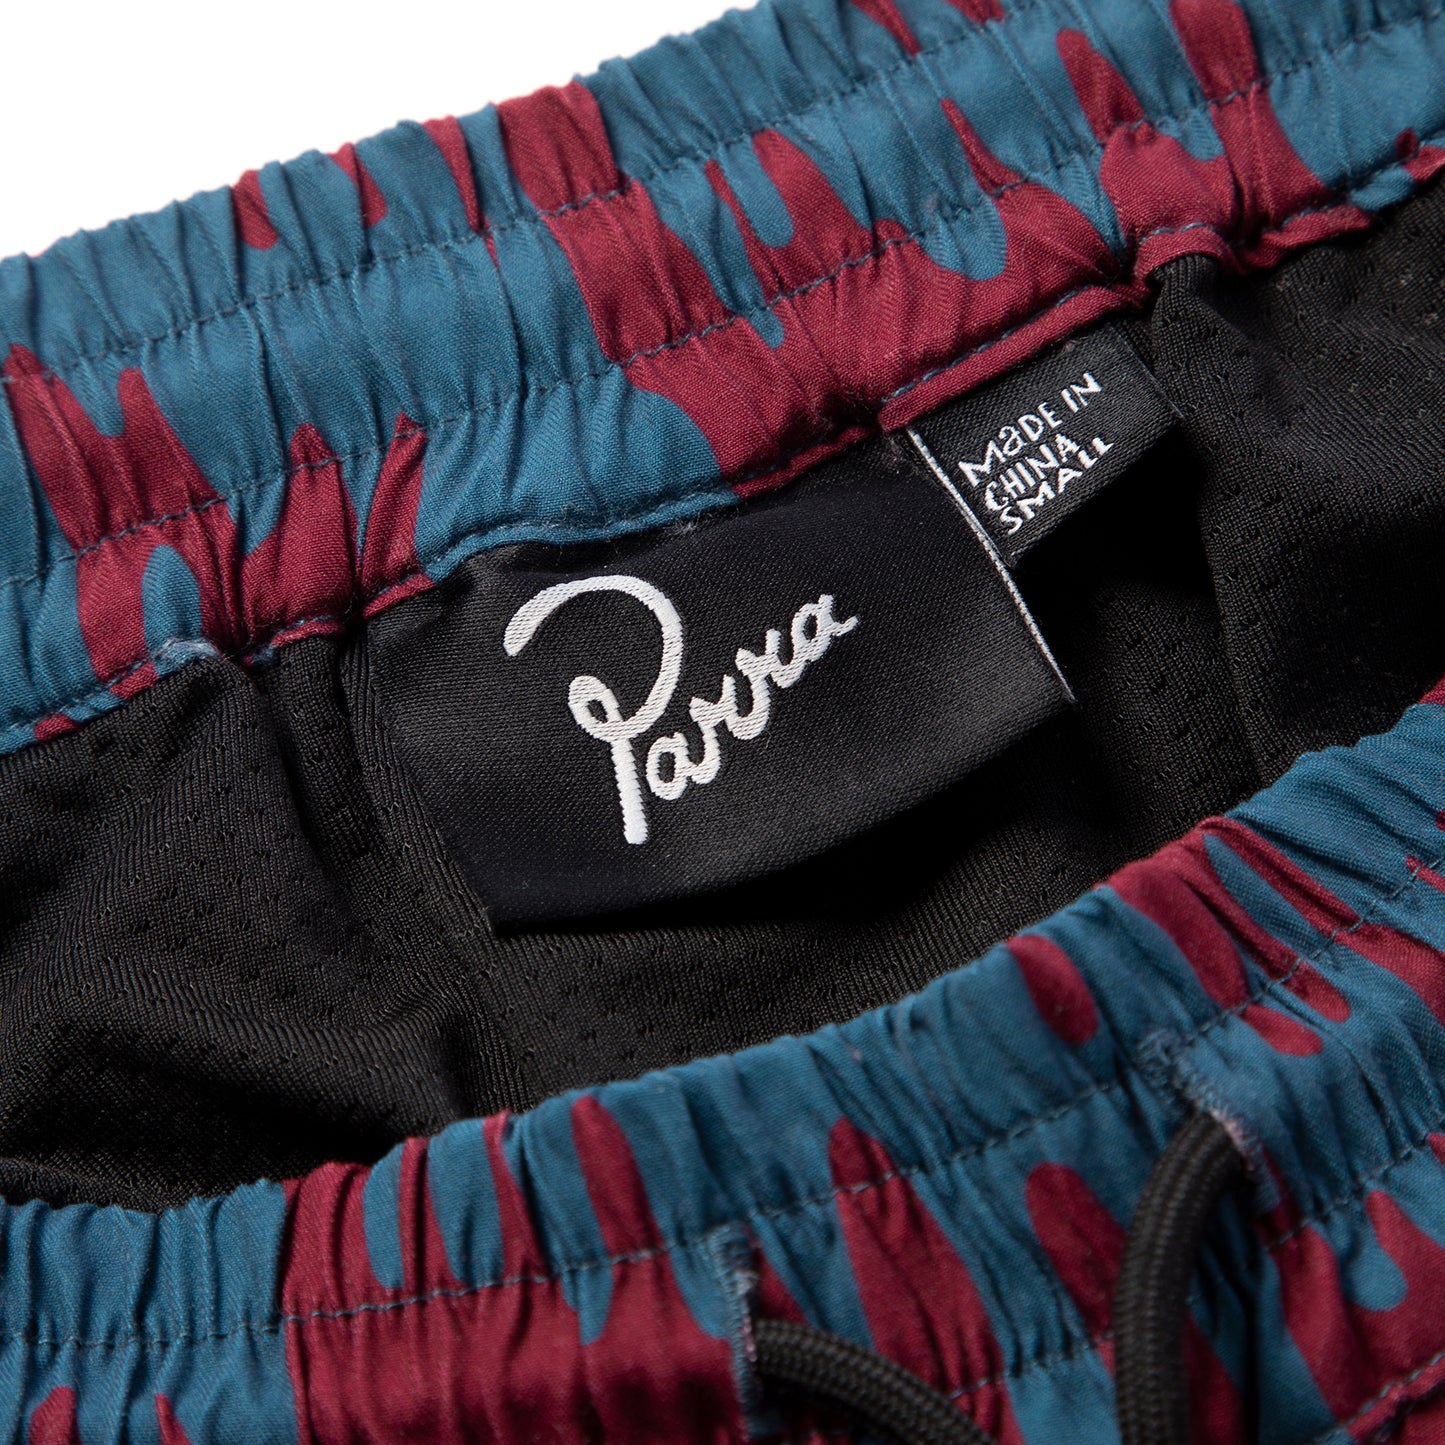 by Parra Tremor Pattern Swim Shorts (Deep Red)